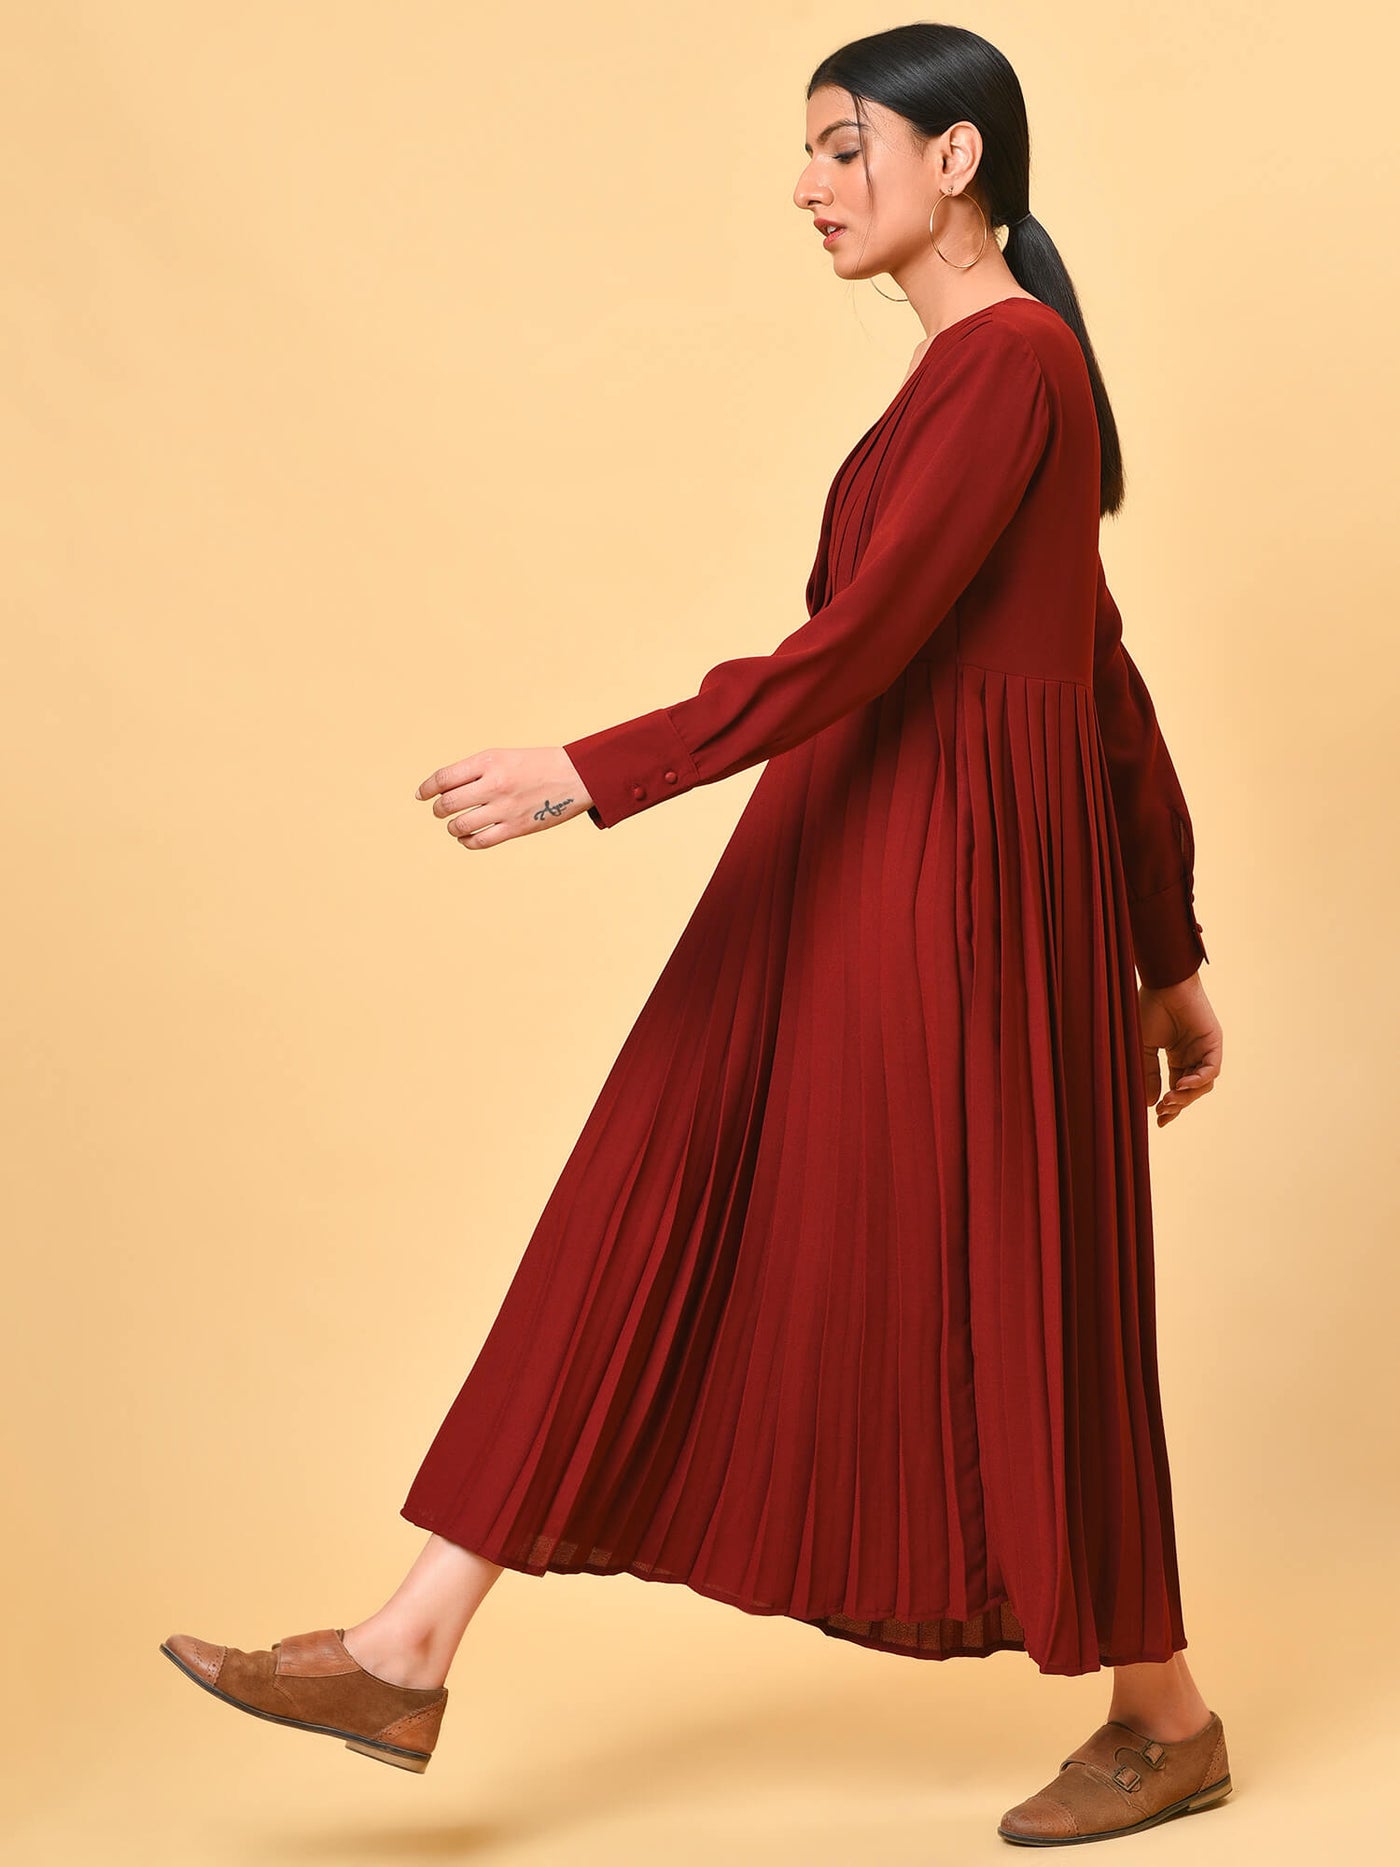 Ultra chic in the maroon pleated long dress